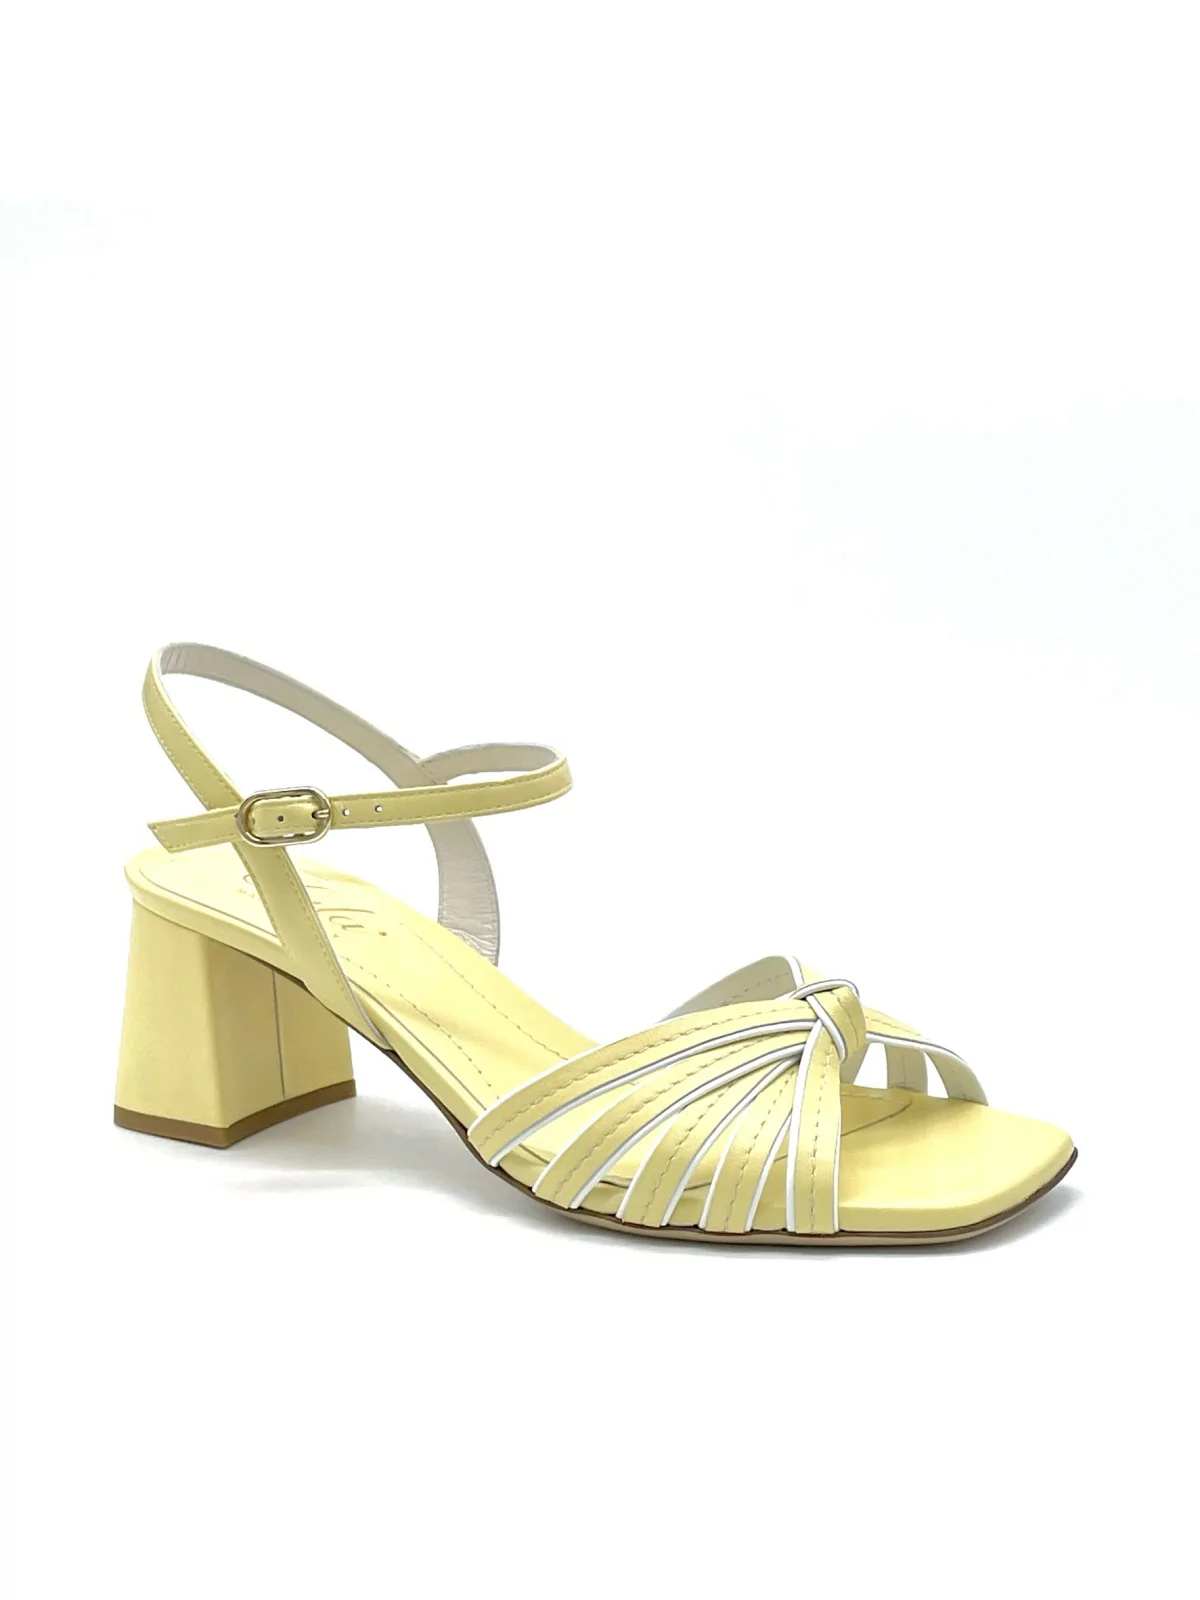 Yellow and white leather sandal with knotted bands. Leather lining. Leather sole